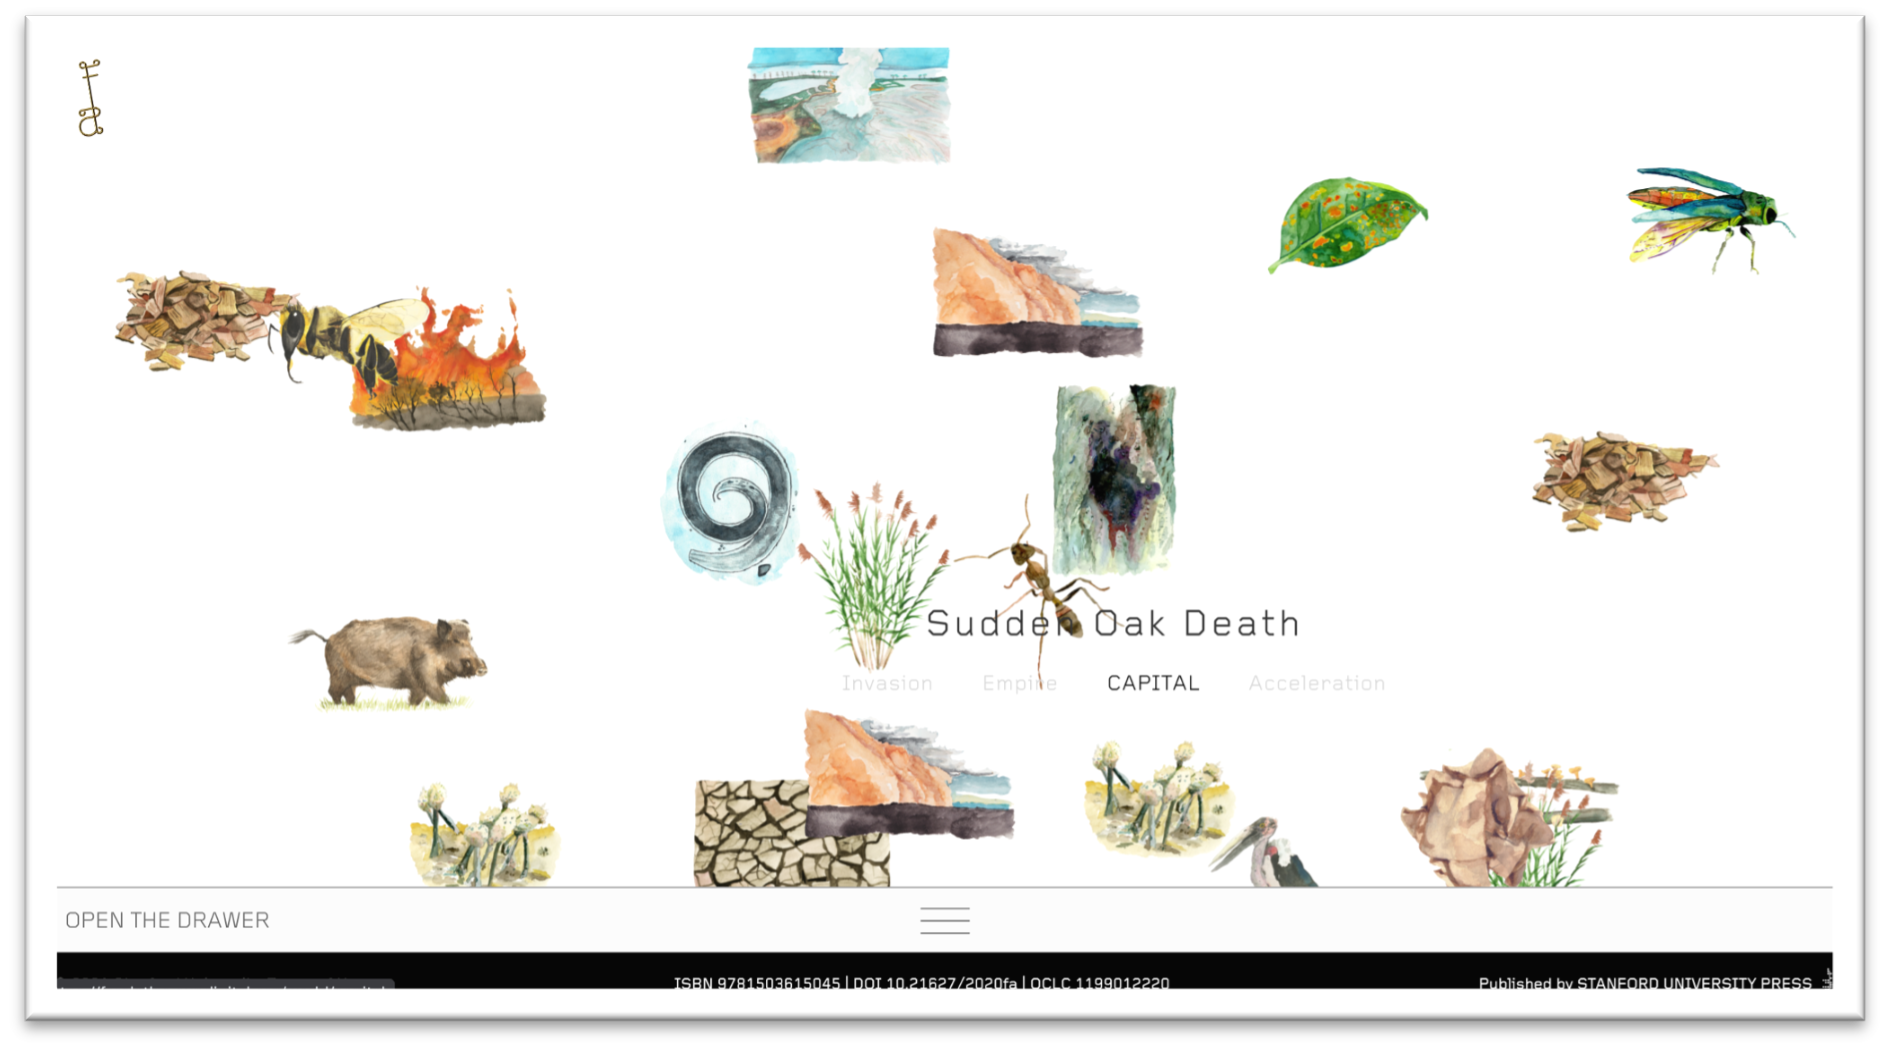 project landing page, showing hover-over text for Sudden Oak Death